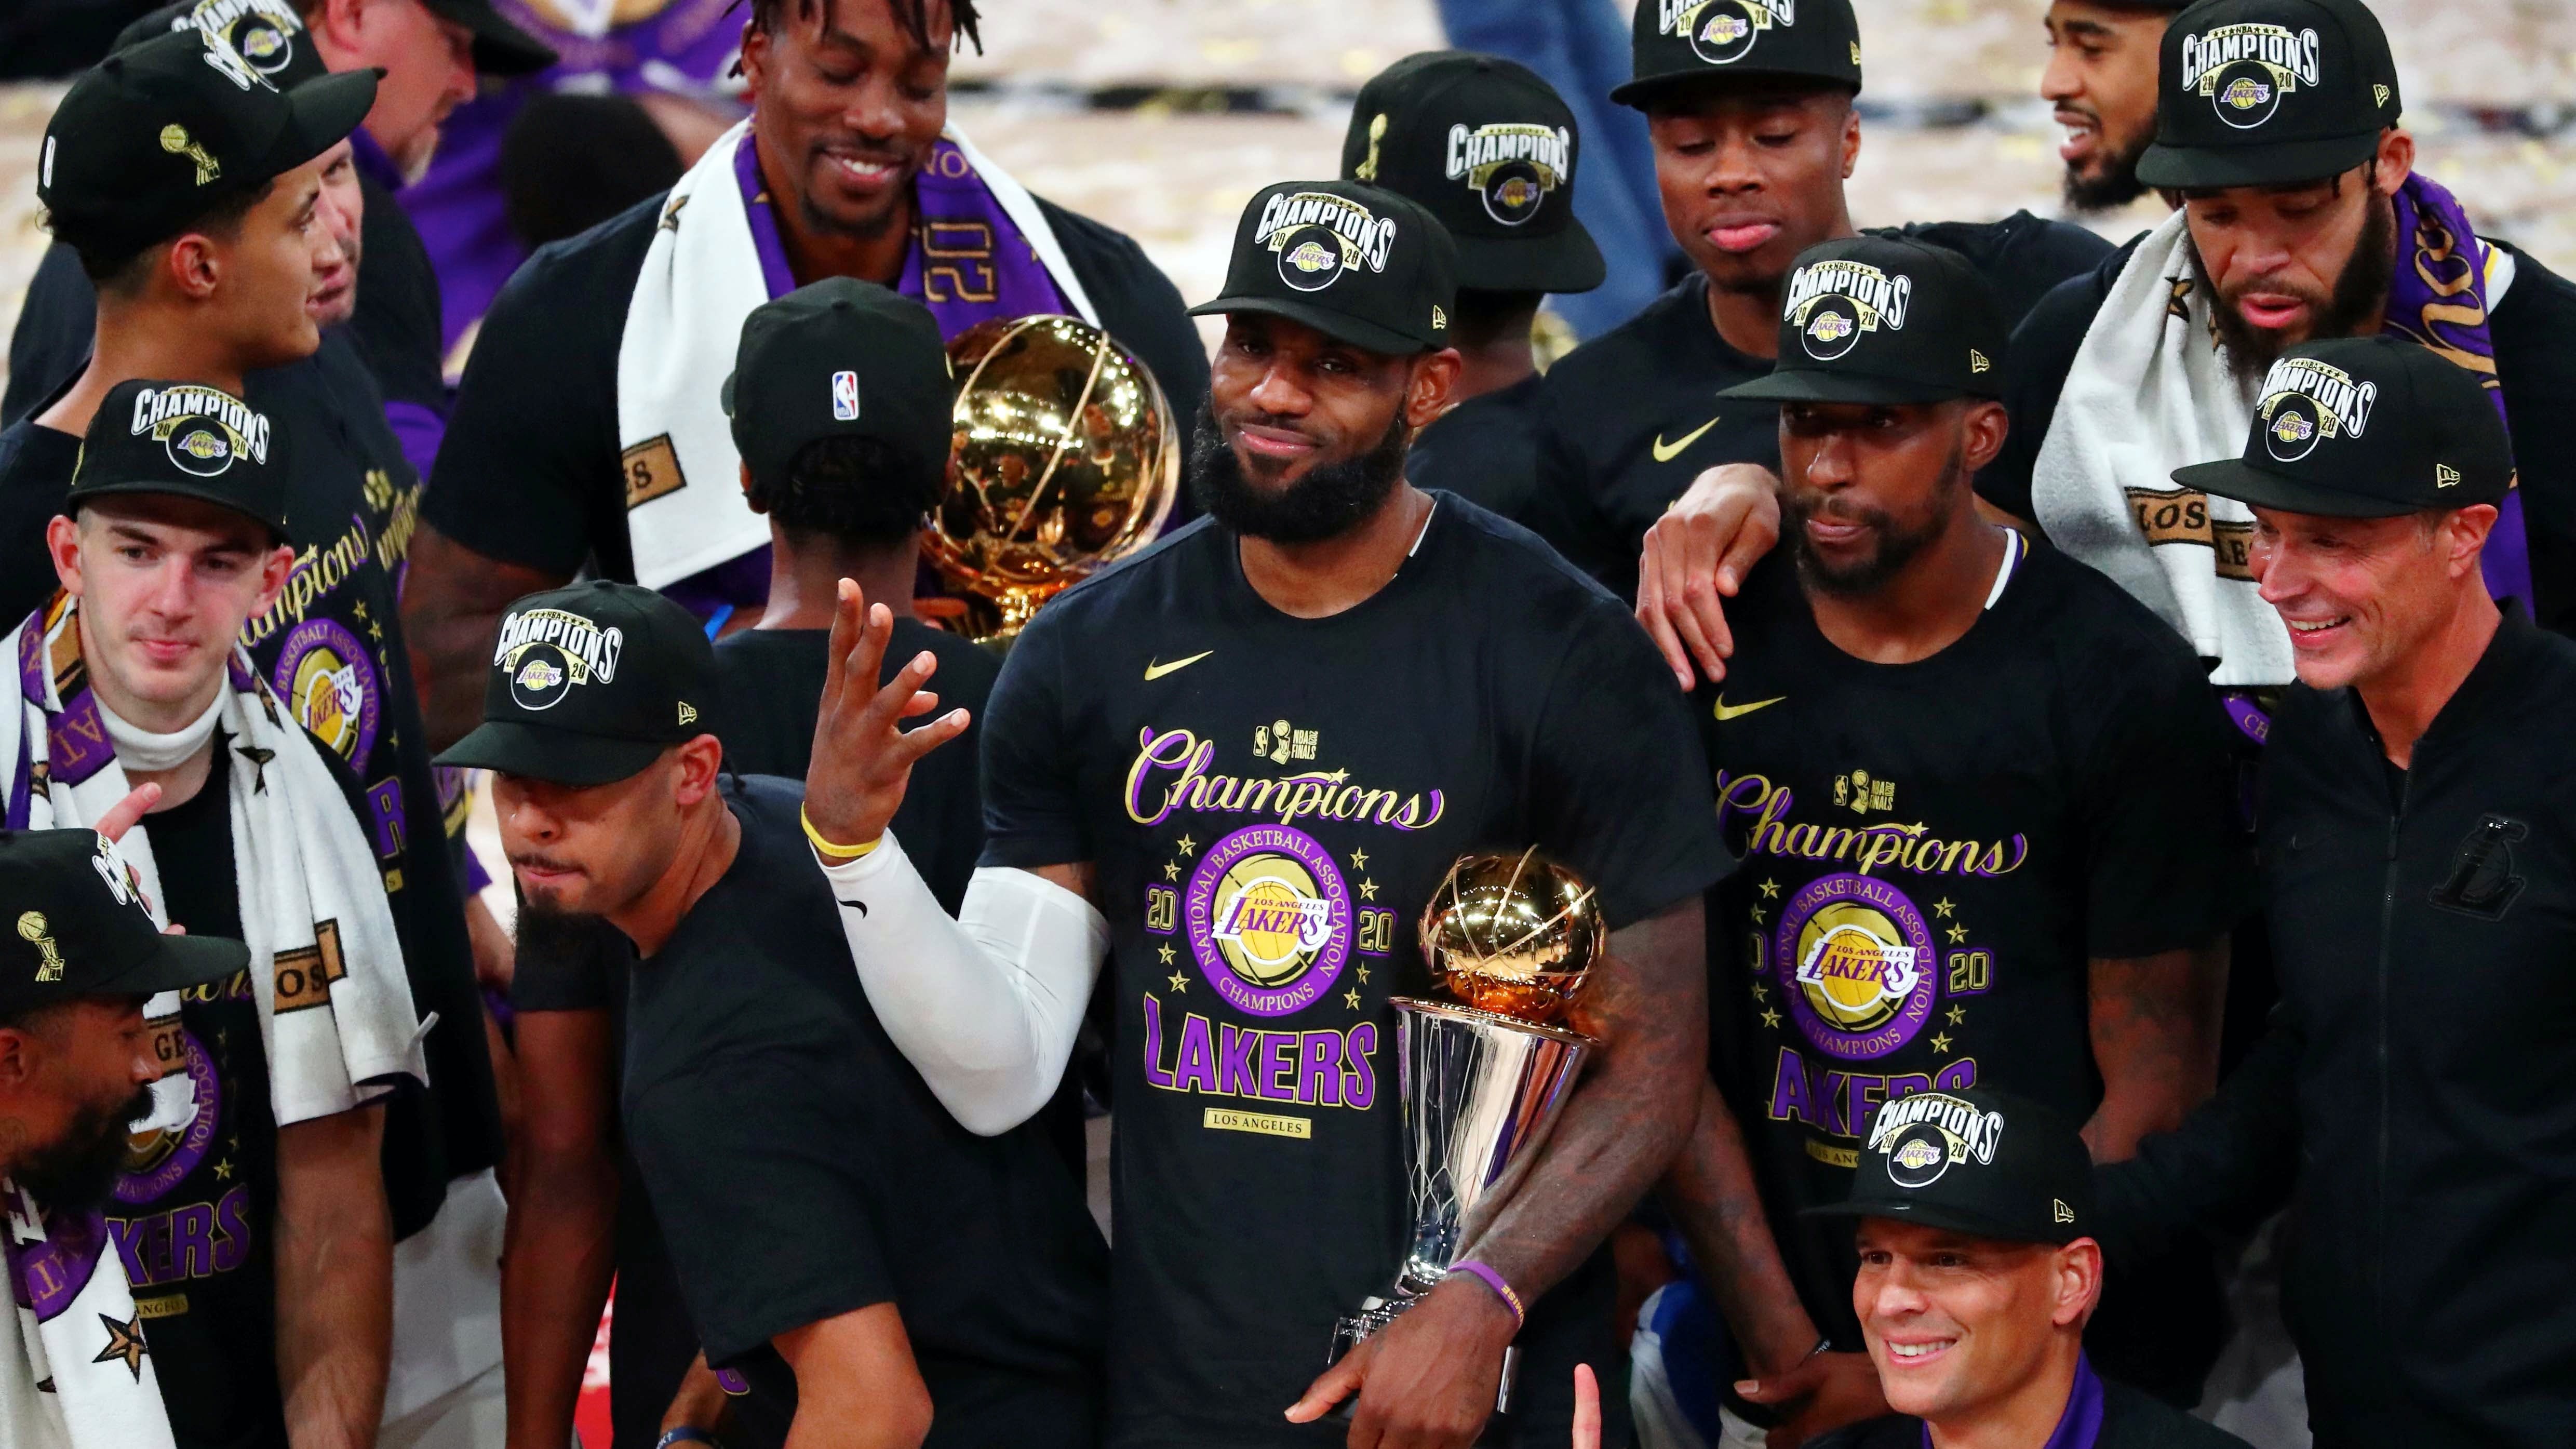 LA Lakers Beat the Miami Heat 106 to 93 in Game 6, 2020 NBA Champions